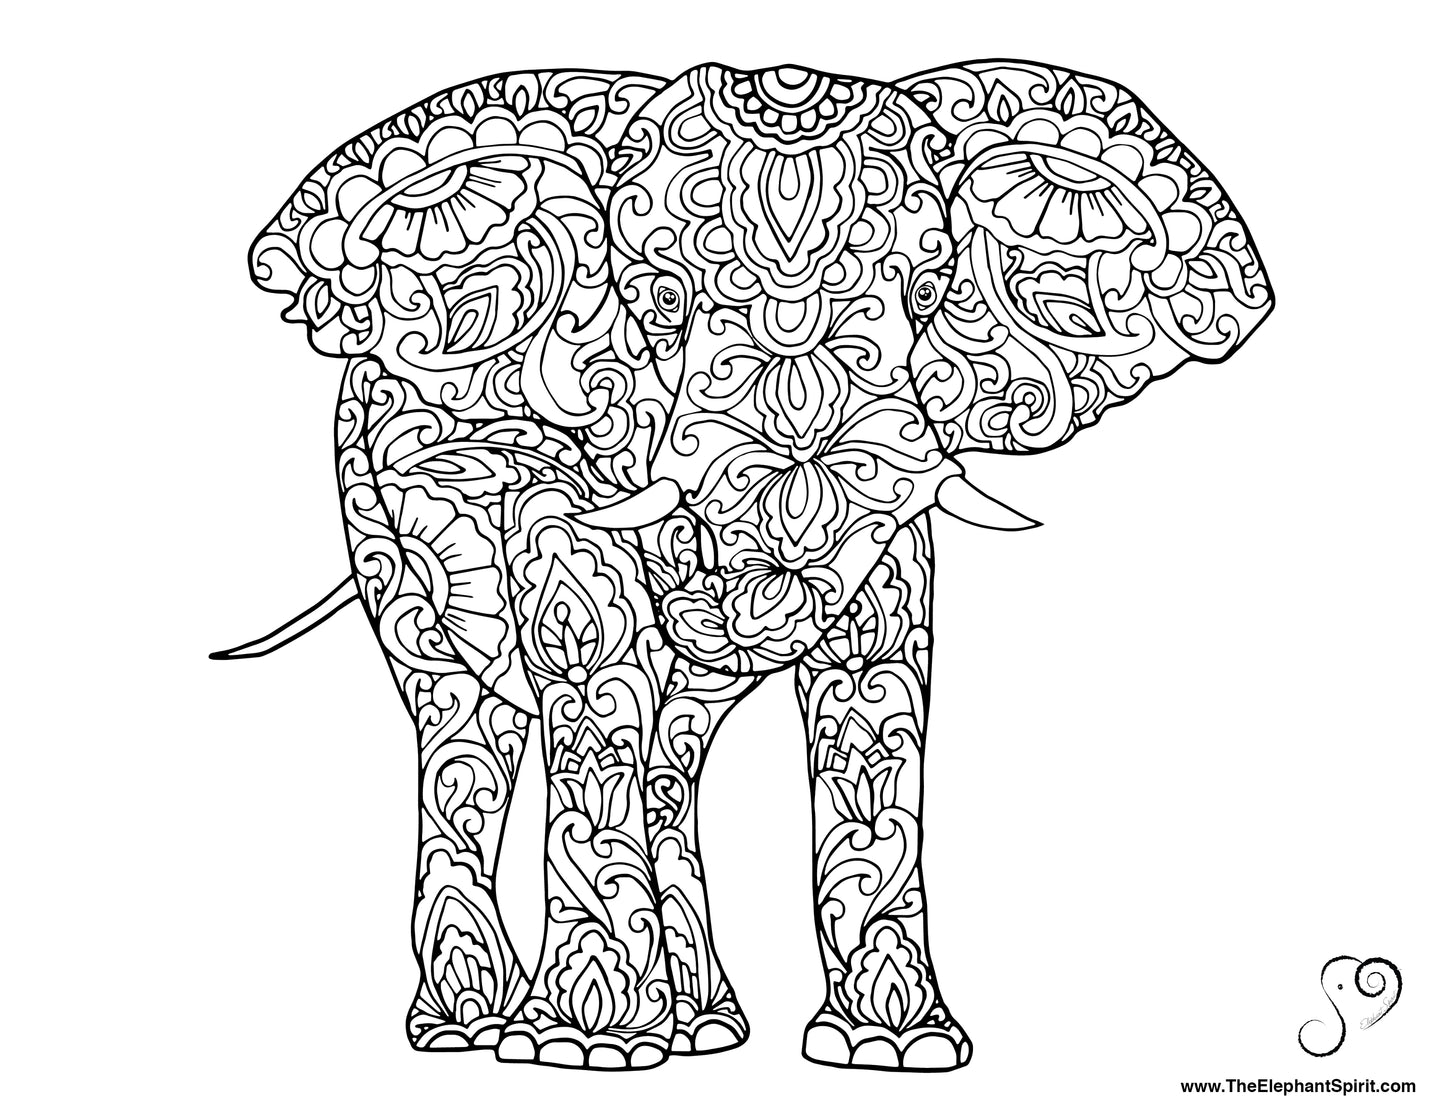 FREE Coloring Page 02-10